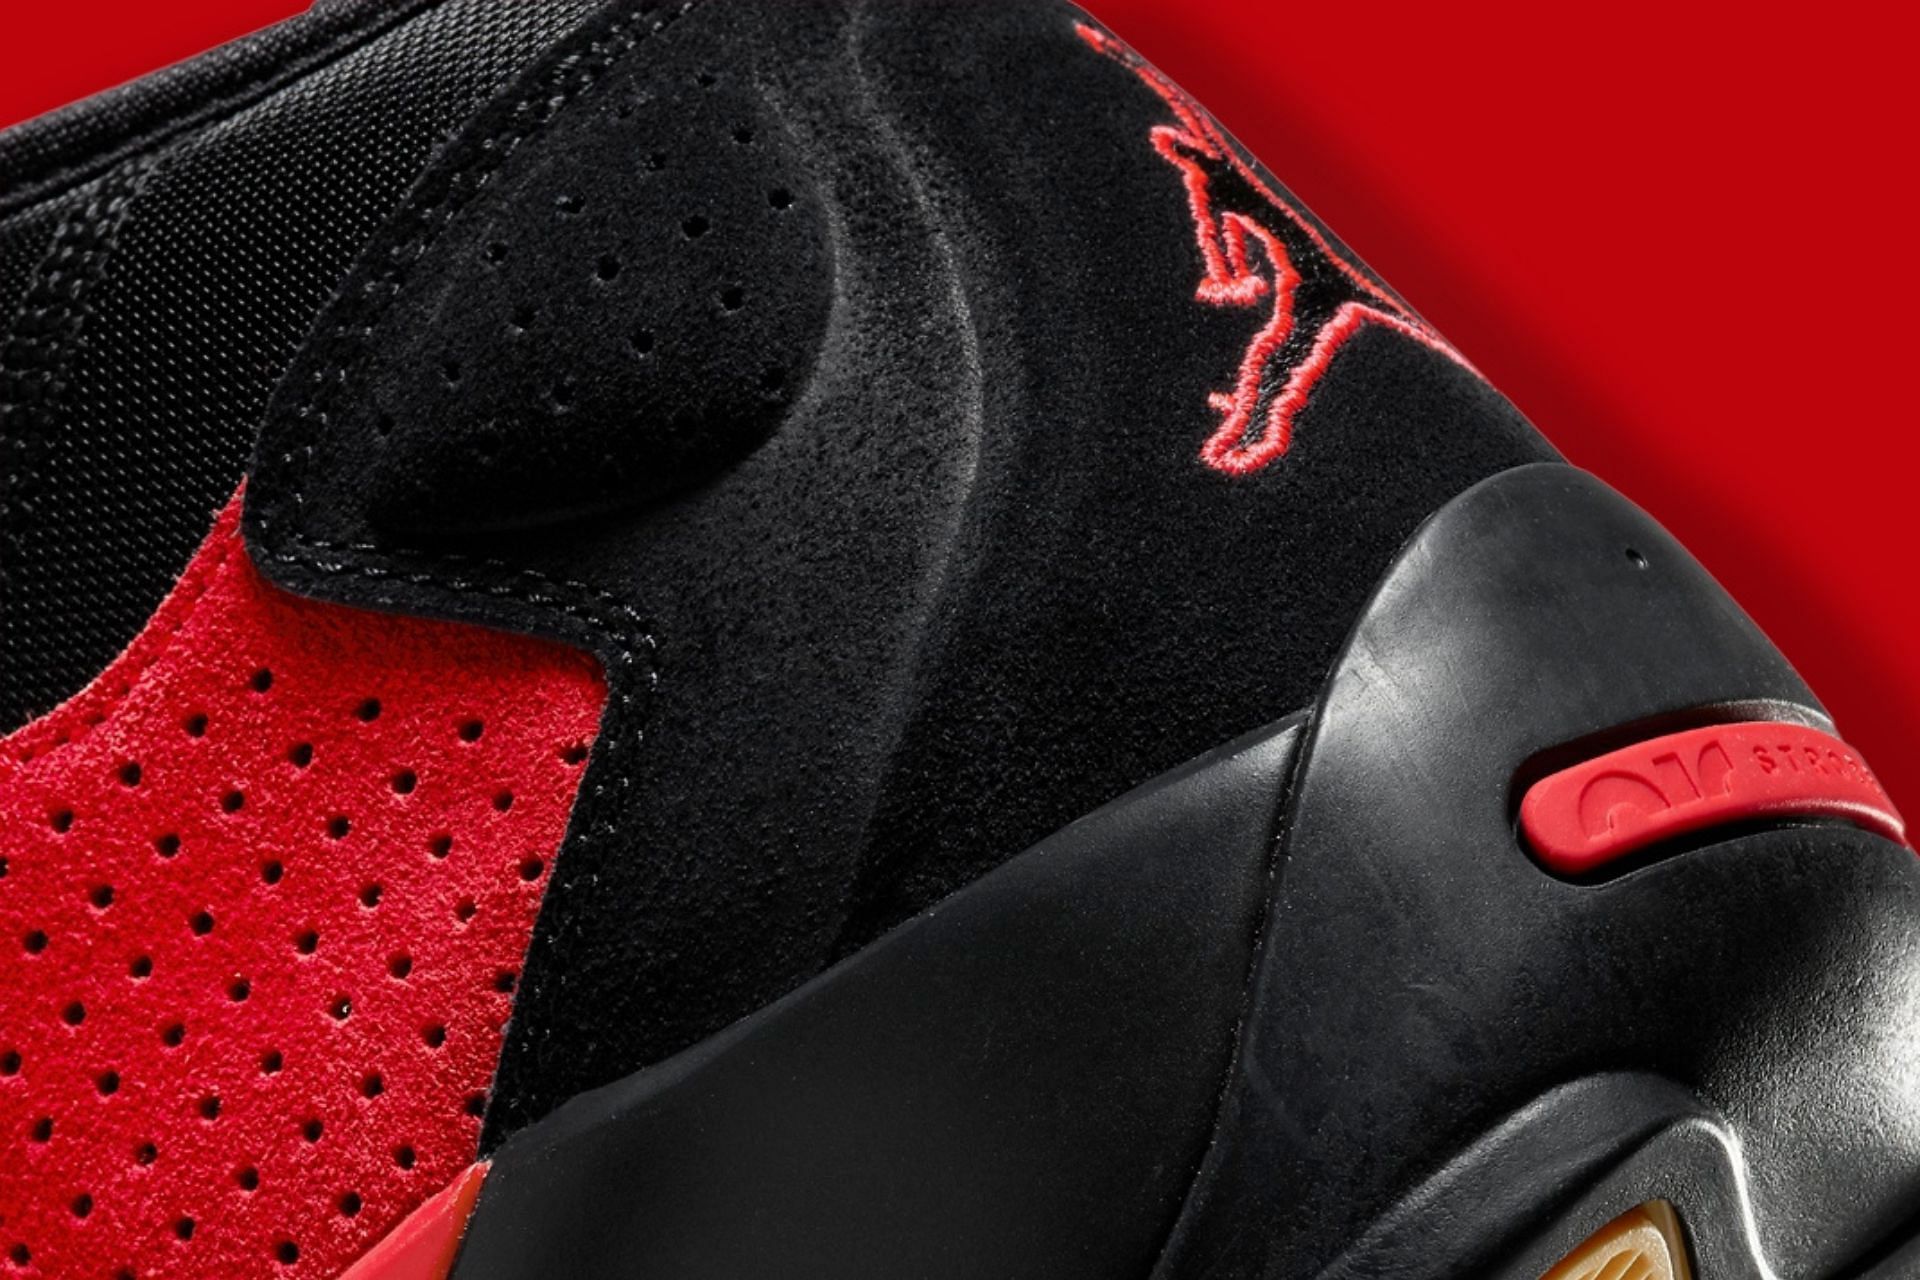 Take a closer look at the heel counter of the arriving Red Suede shoes (Image via Nike)